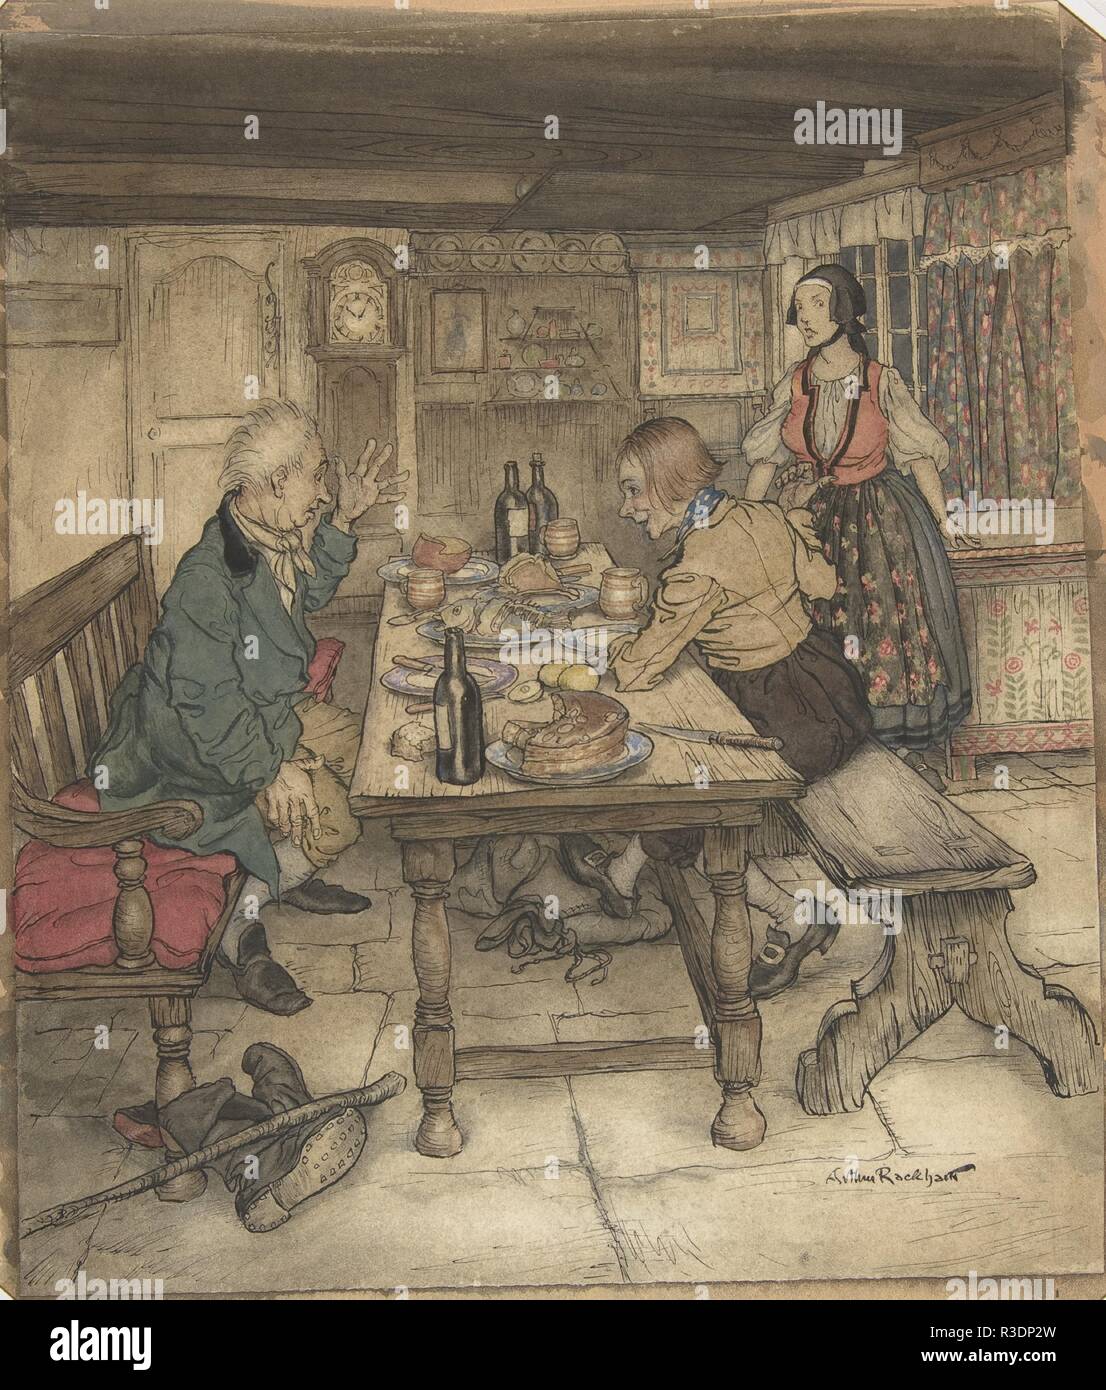 The Farmer's Supper. Artist: Arthur Rackham (British, London 1867-1939 Limpsfield, Surrey). Author: Hans Christian Andersen (Danish, Odense 1805-1875 Copenhagen). Dimensions: sheet: 11 1/8 x 9 9/16 in. (28.3 x 24.3 cm). Date: ca. 1932.  Rackham's great success as a children's book illustrator was founded both on his whimsical imagery and understanding of the new four-color printing process. Since the latter could effectively translate only a narrow range of hues, the artist worked in muted tones to ensure the faithful reproducion of his watercolors. Often, he made drawings much larger than the Stock Photo